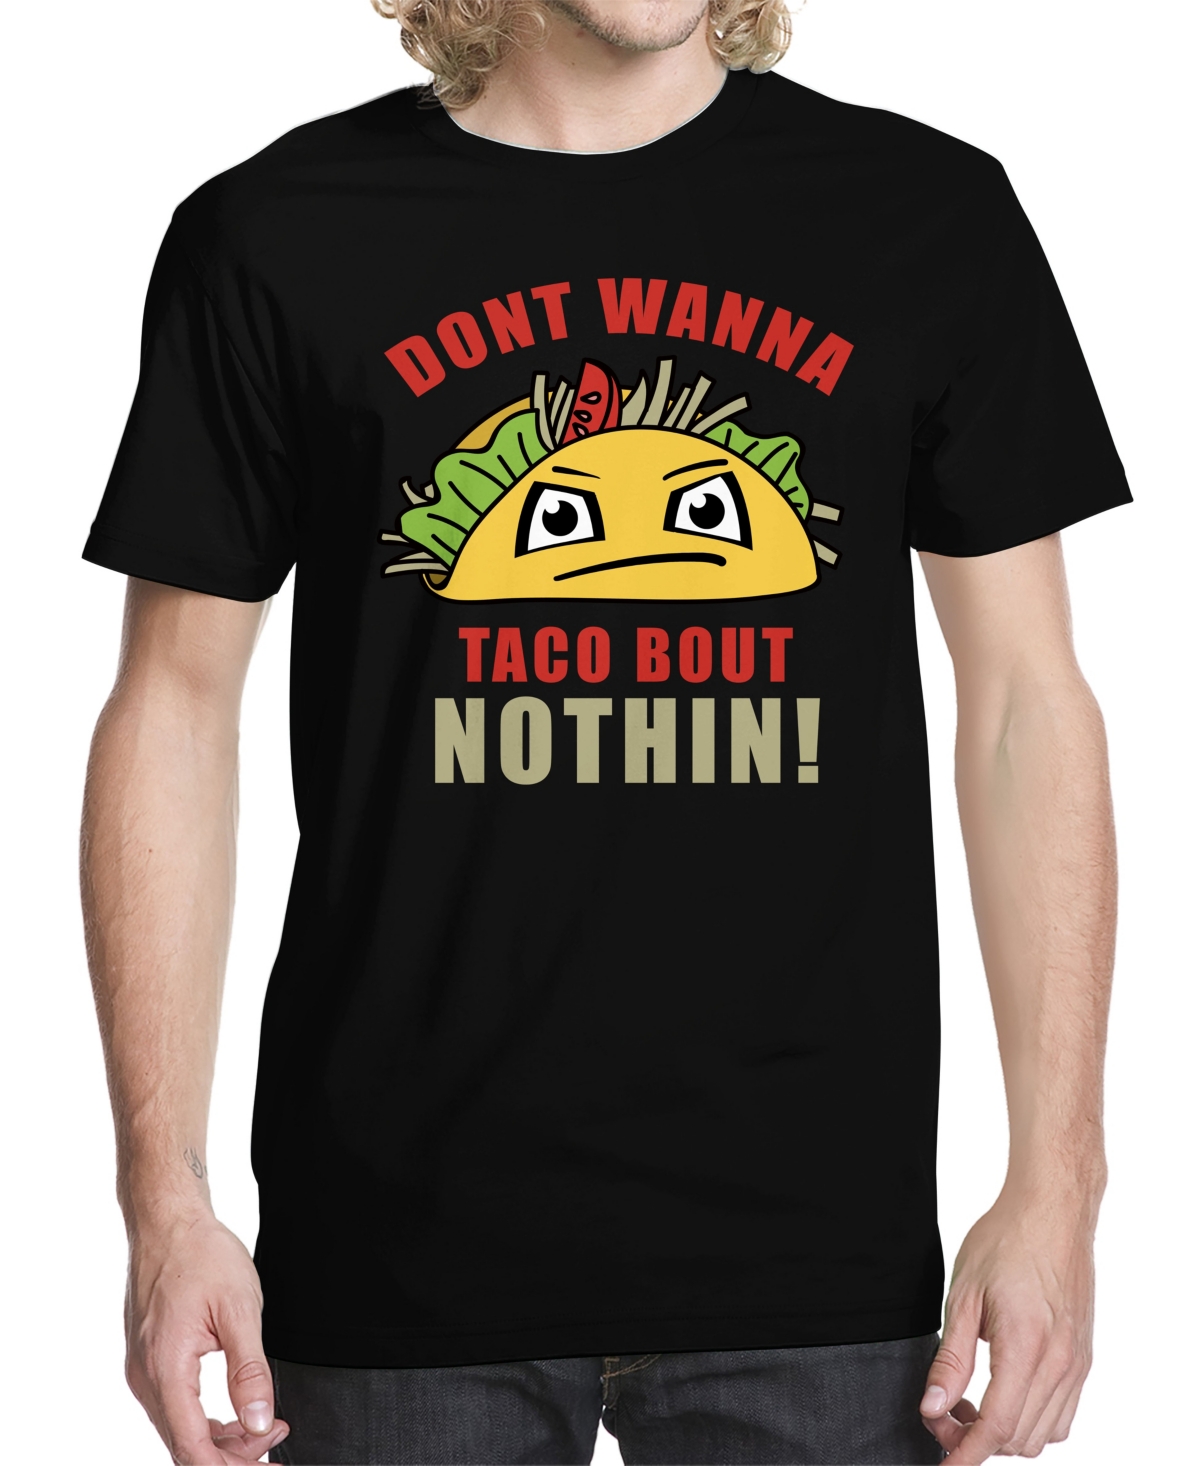 Men's Taco Bout Nothing Graphic T-shirt - Black